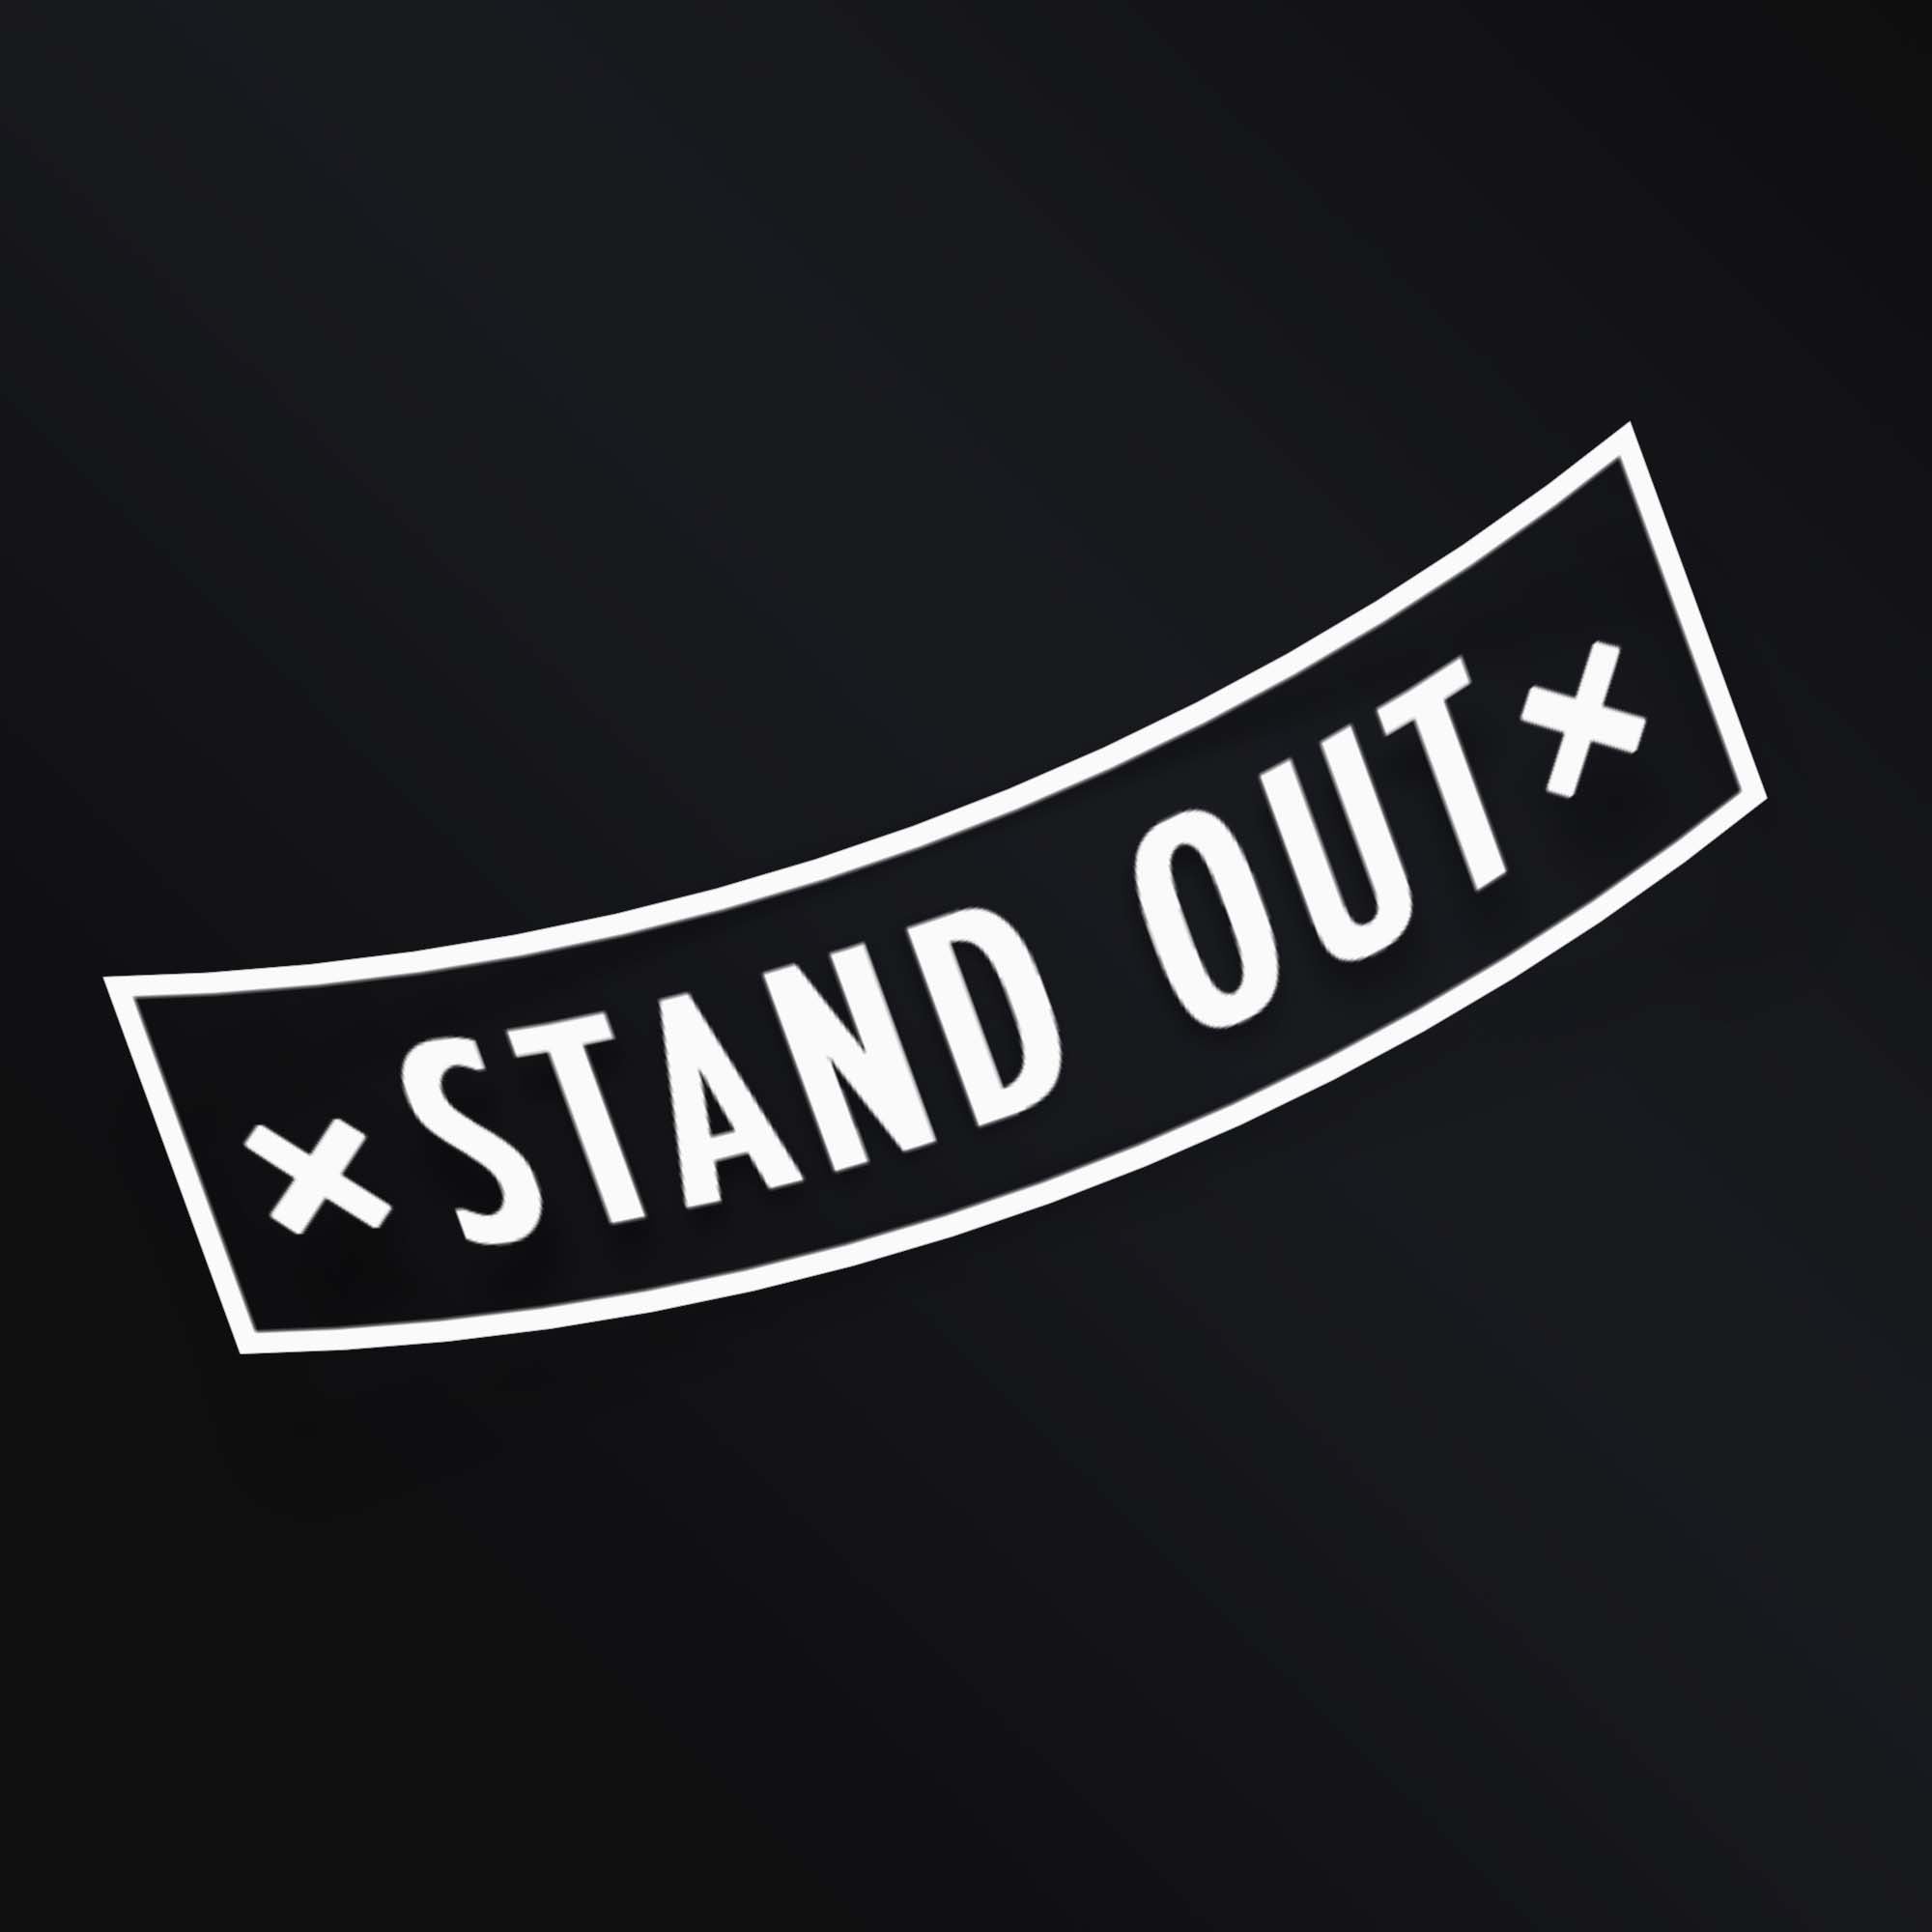 STAND OUT STICKER